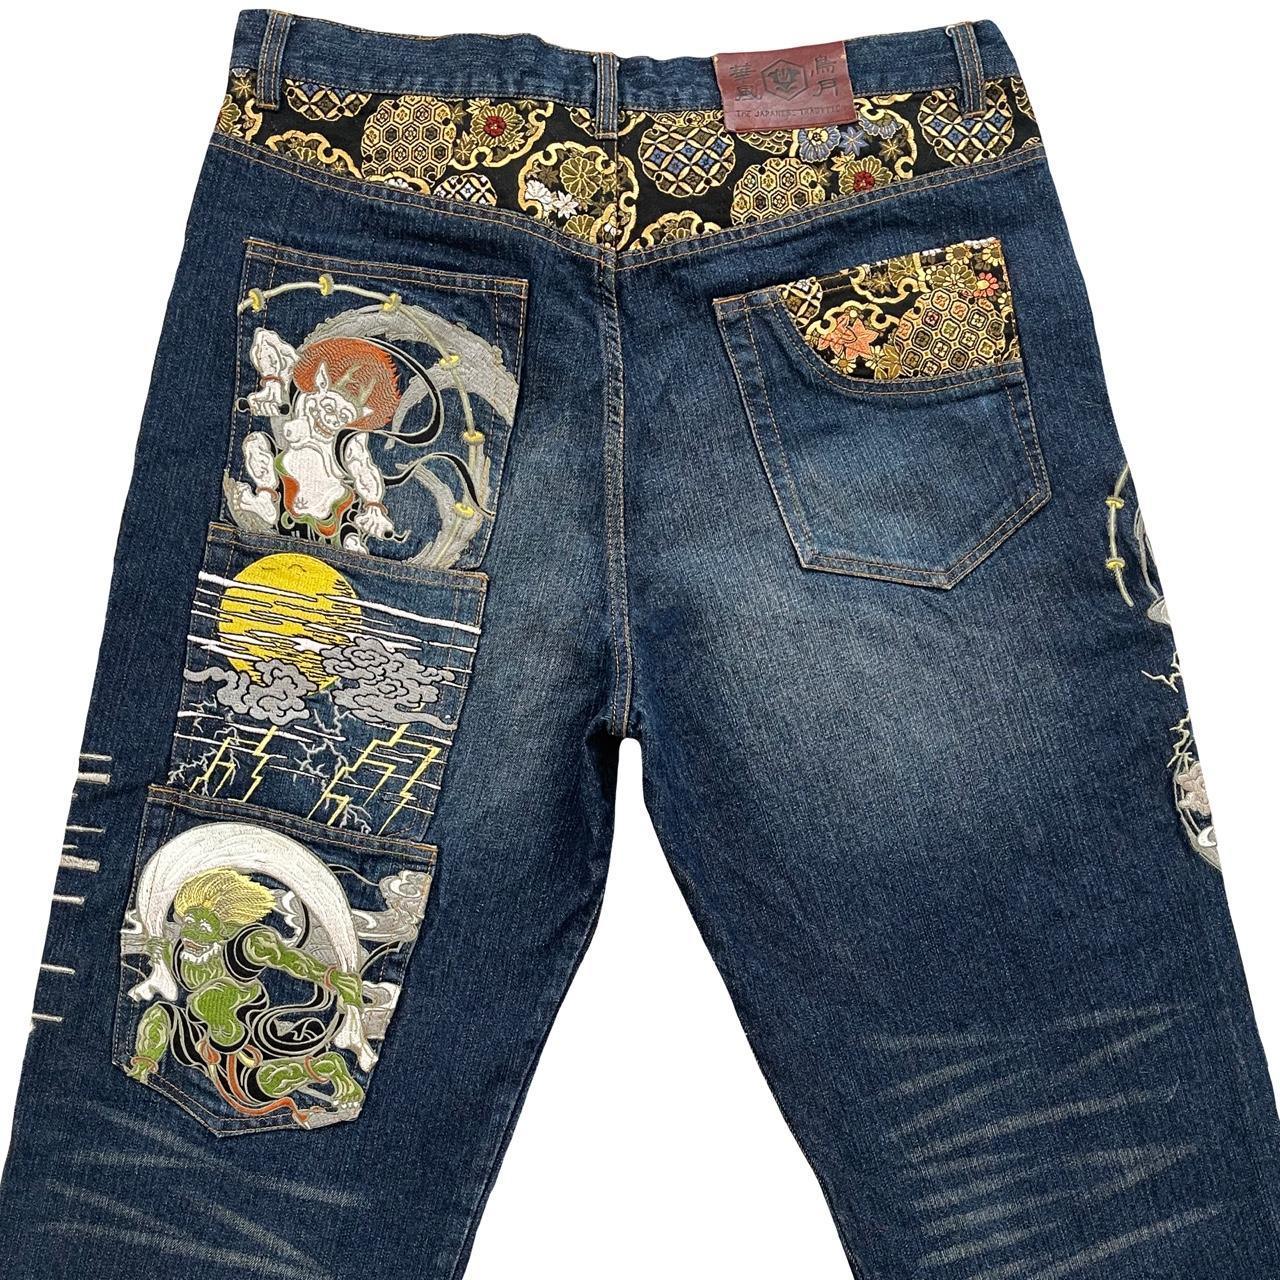 Japanese Tradition Jeans - Known Source